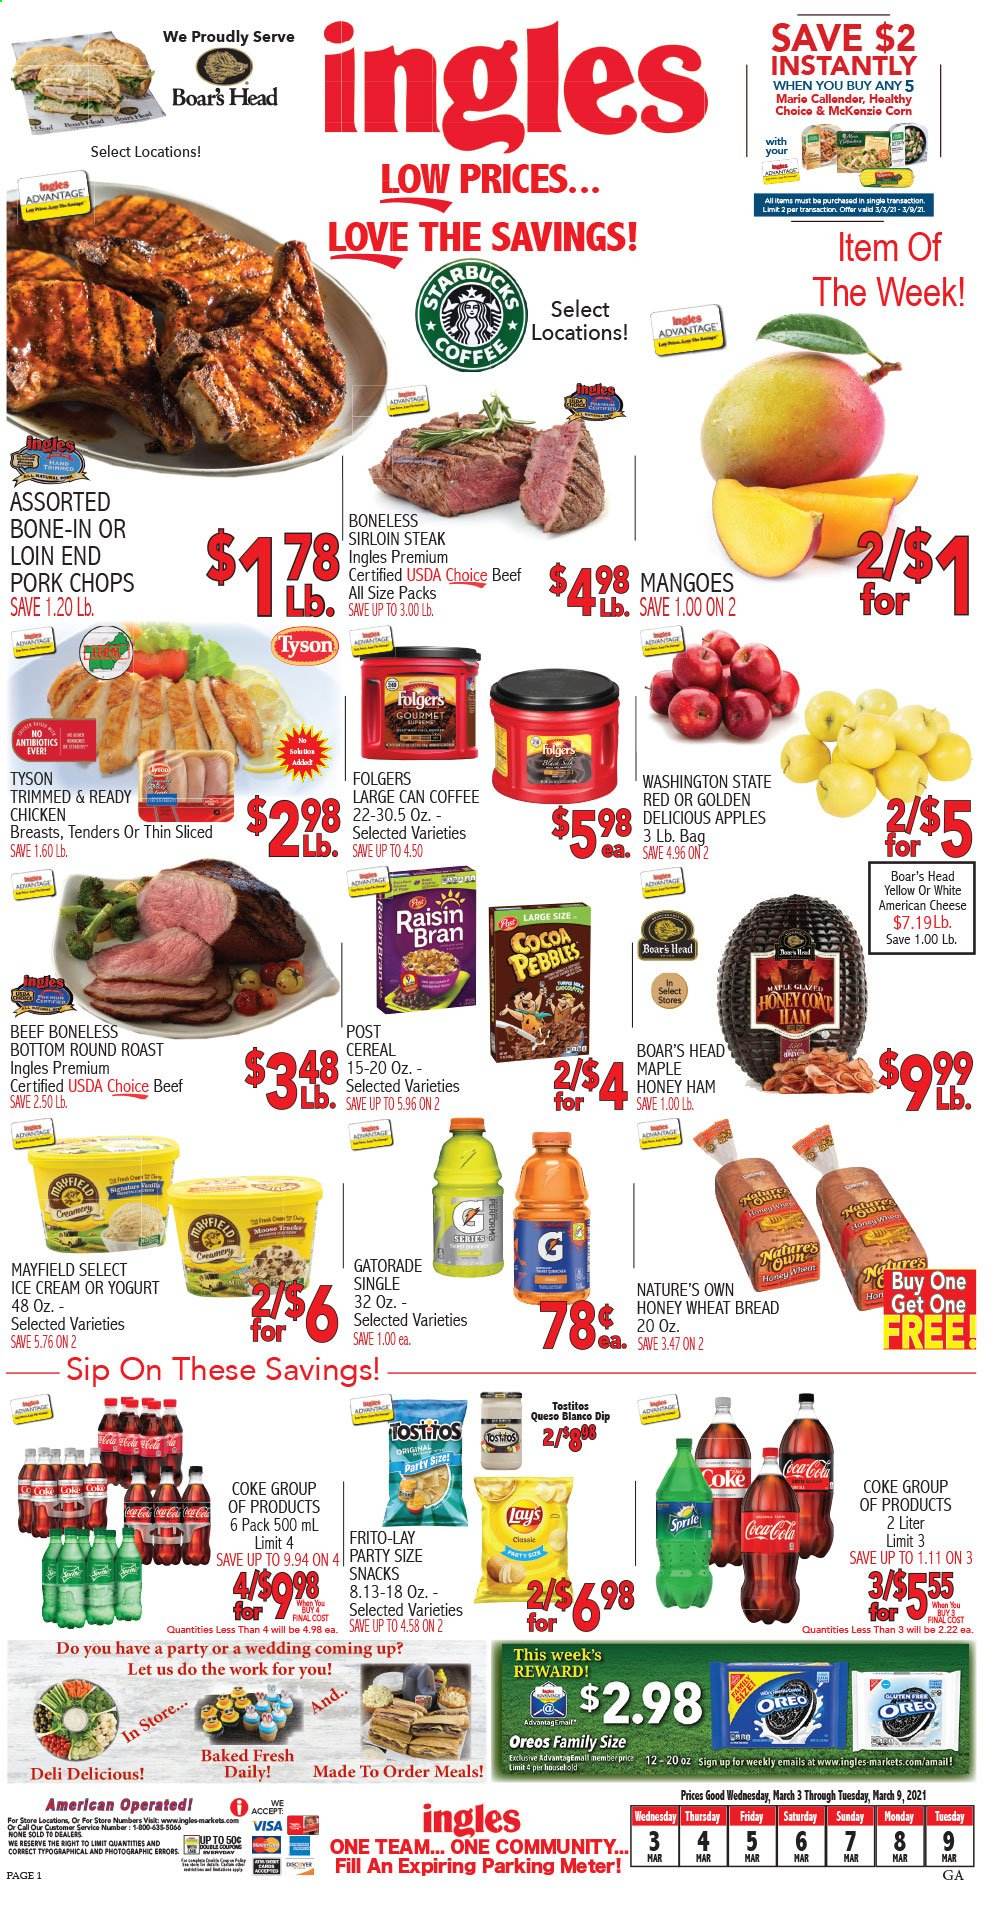 thumbnail - Ingles Flyer - 03/03/2021 - 03/09/2021 - Sales products - Golden Delicious, wheat bread, ham, american cheese, cheese, Oreo, yoghurt, dip, ice cream, corn, mango, snack, Lay’s, Frito-Lay, Tostitos, cocoa, cereals, Raisin Bran, Coca-Cola, Gatorade, coffee, Folgers, chicken breasts, beef meat, beef sirloin, steak, round roast, sirloin steak, pork chops, pork meat, Nature's Own. Page 1.